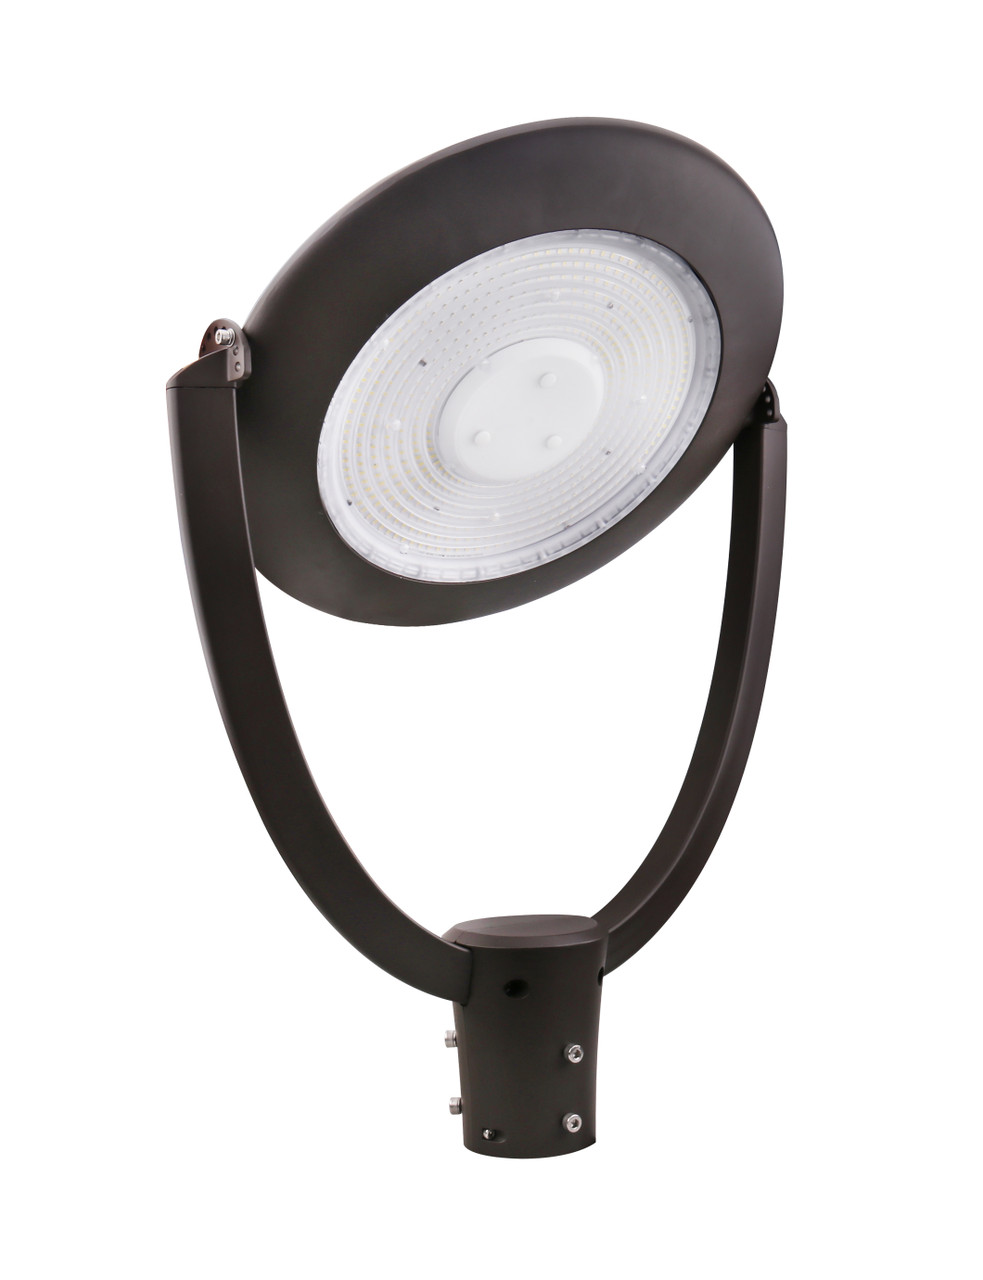 ▪ Available in 3000k (warm white), 4000k (neutral white), and 5000k
(cool white) color temperature.*
▪ Adjustable from 0°-90°.
▪ Long-life LEDs provide at least 70% of initial lumen output (L70) for > 174,000 hours of operation, and at least 90% of initial lumen output (L90) for > 51,000 hours of operation.**
▪ LED chromaticity based on < 6-step ANSI quadrangles.
▪ LED color maintenance < 0.002 chromaticity shift (Δu’v’) over the initial 6,000 hours of operation.
▪ PTFR provides a range of 7,000 to 20,000 nominal lumens and uses 52 to 152 nominal watts
▪ 1-10vdc dimming drivers, which provide 10% continuous dimming are standard.
▪ Universal 120-277 AC voltage (50-60Hz) is standard.
▪ Power factor > 0.90.
▪ Total harmonic distortion < 20%.
▪ Color rendering index (Ra) > 80. Red color rendering of at least 0.
▪ Aluminum housing with dark bronze powder coat finish.
▪ PTFR-7L & 10L = glass lens. PTFR-20L = polycarbonate lens.
▪ Factory installed NEMA photocell receptacle & shorting cap options available. NEMA photocells are available as accessories (order separately).
▪ Compatible with 2” - 2 7⁄8” pole/tenons.
▪ Easy installation in new construction or retrofit applications.
▪ cULus listed for wet locations in ambient temperatures from
- 30°C to 45°C (-22°F to 113°F).
▪ IP65 rated for ingress protection.
▪ DLC 5.1 premium approved.
▪ Complies with FCC Part 15, class B.
▪ Complies with ICE61000-4-5, input transient surge protection (2-6kV).
▪ Complies with RoHS (Restriction on Hazardous Substances) requirements.
▪ 5-year warranty of all electronics and housing.